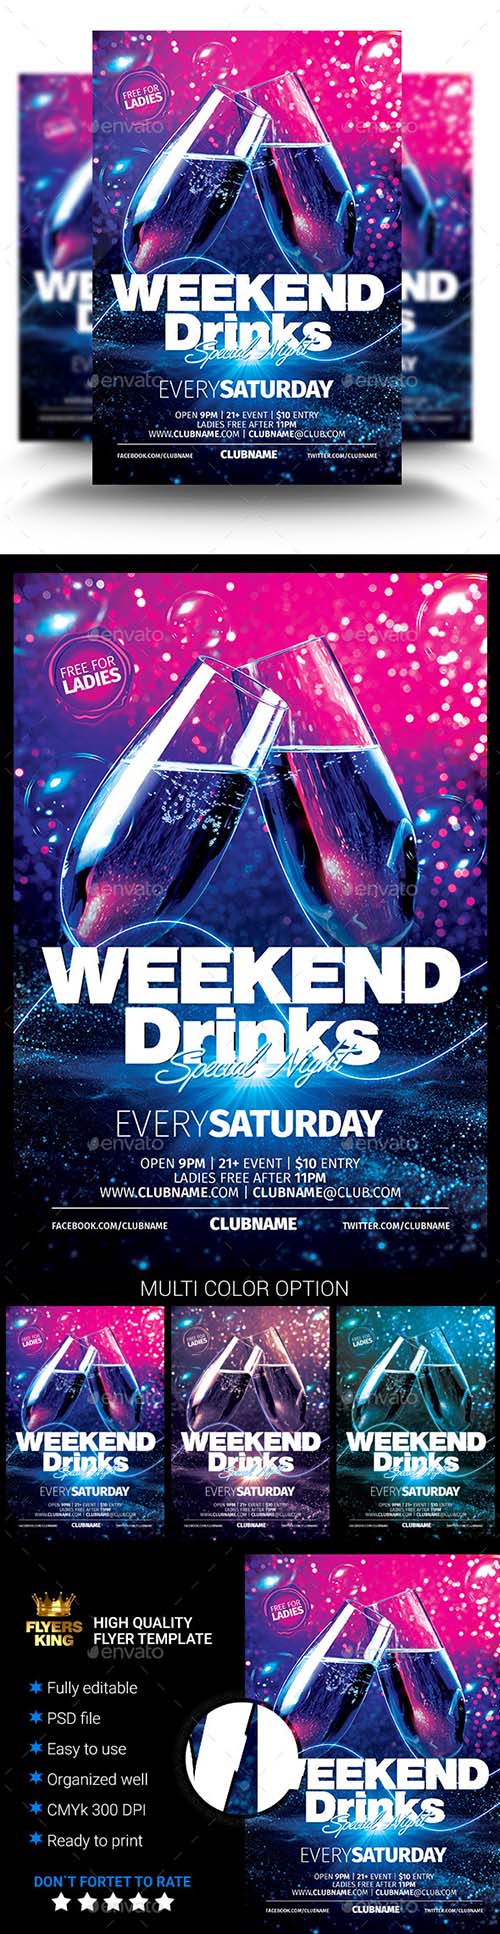 GraphicRiver - Weekend Drinks Party Flyer 11218406